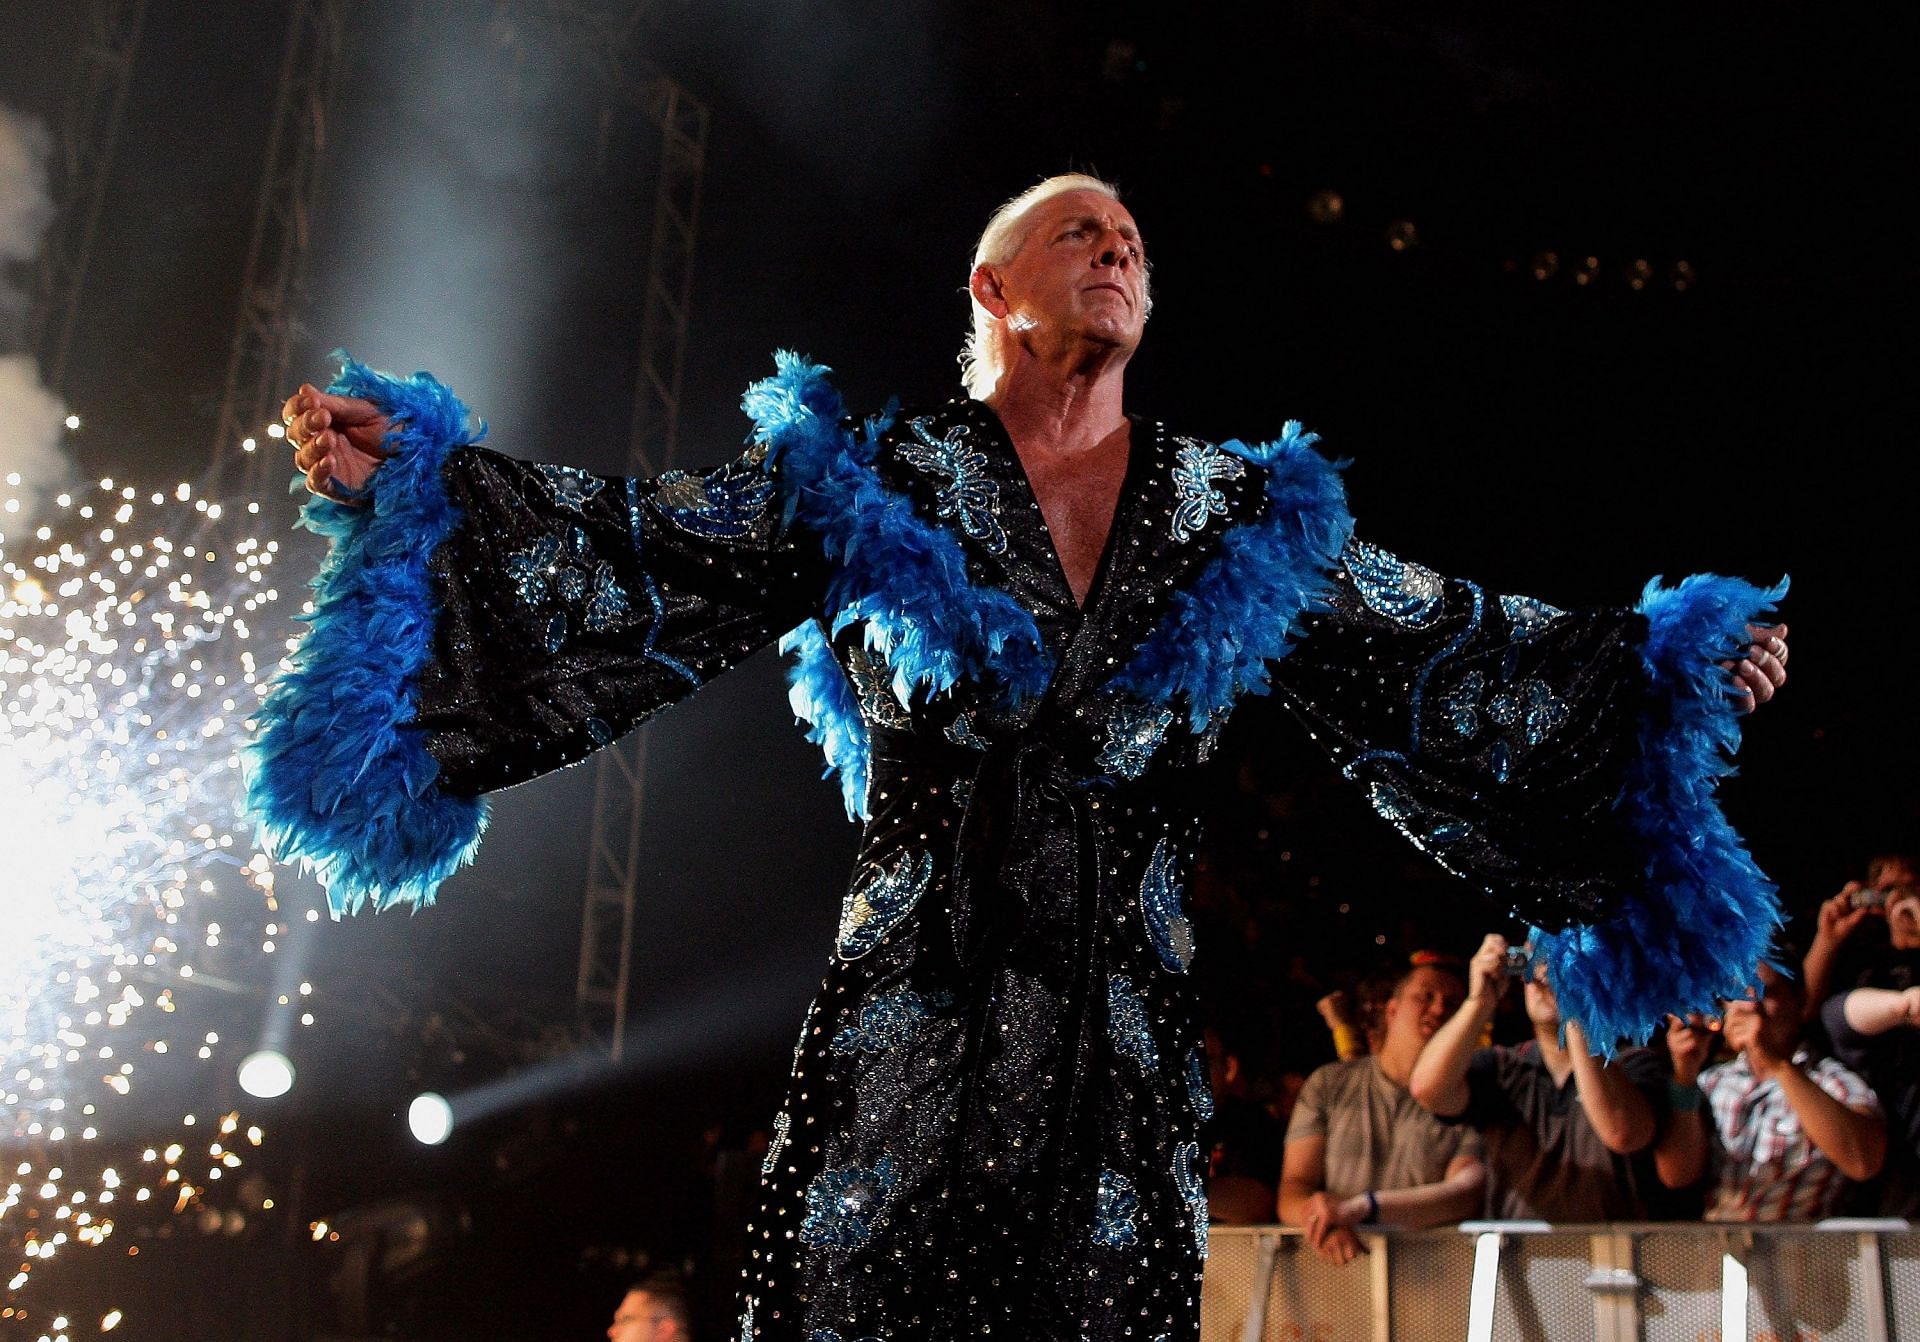 Ric Flair is a record 16-time World Champion